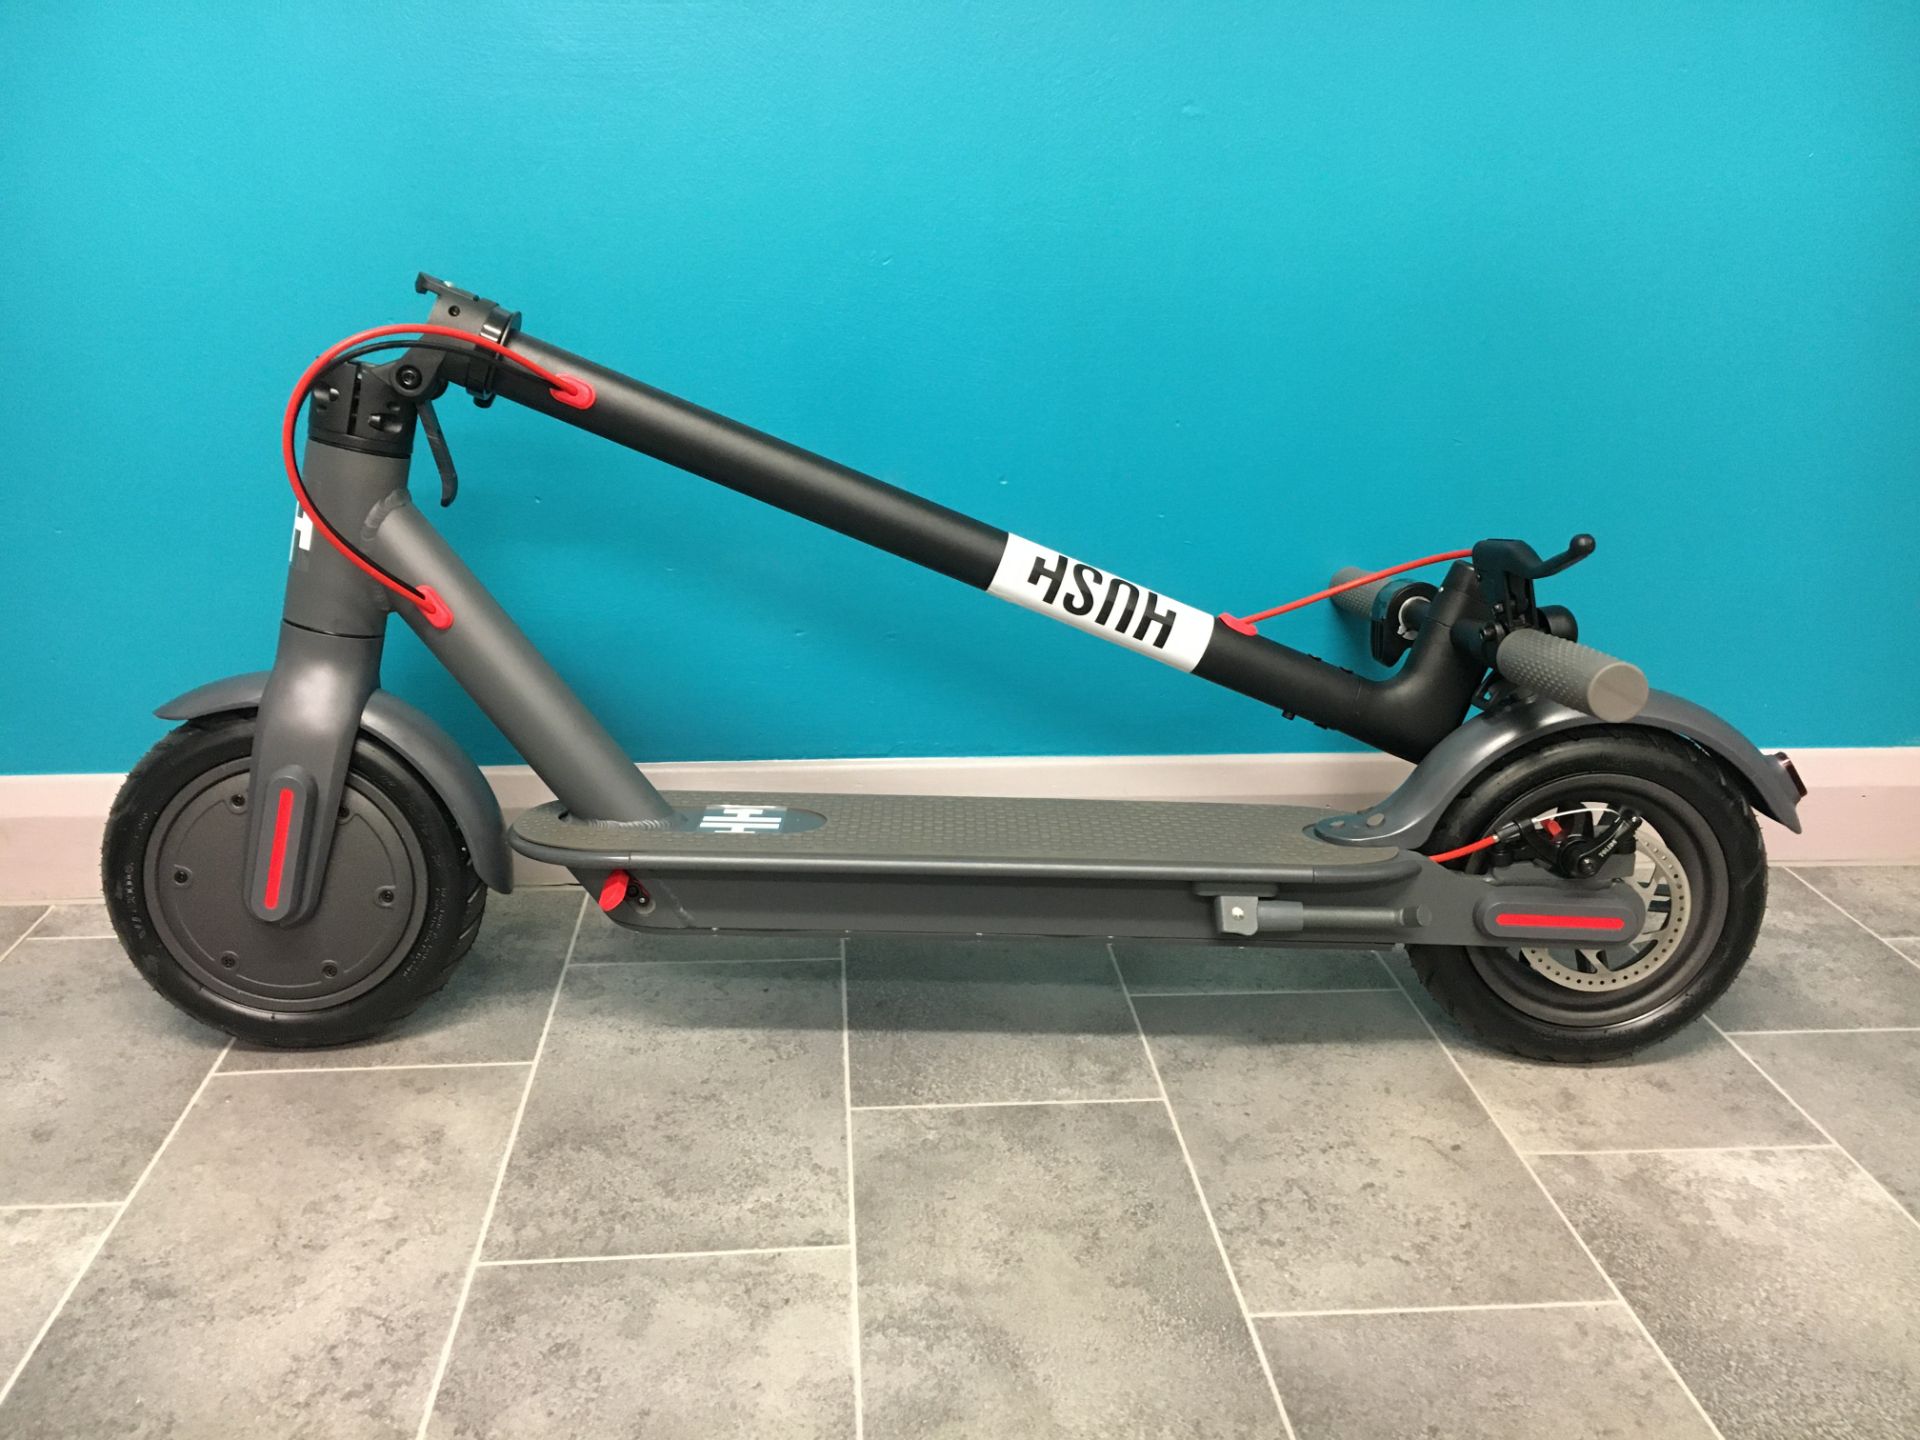 + VAT Hush Foldable Electric Scooter - Three Speeds - Max Speed 25Km/H - ABS Disc Brakes - Range - Image 2 of 4